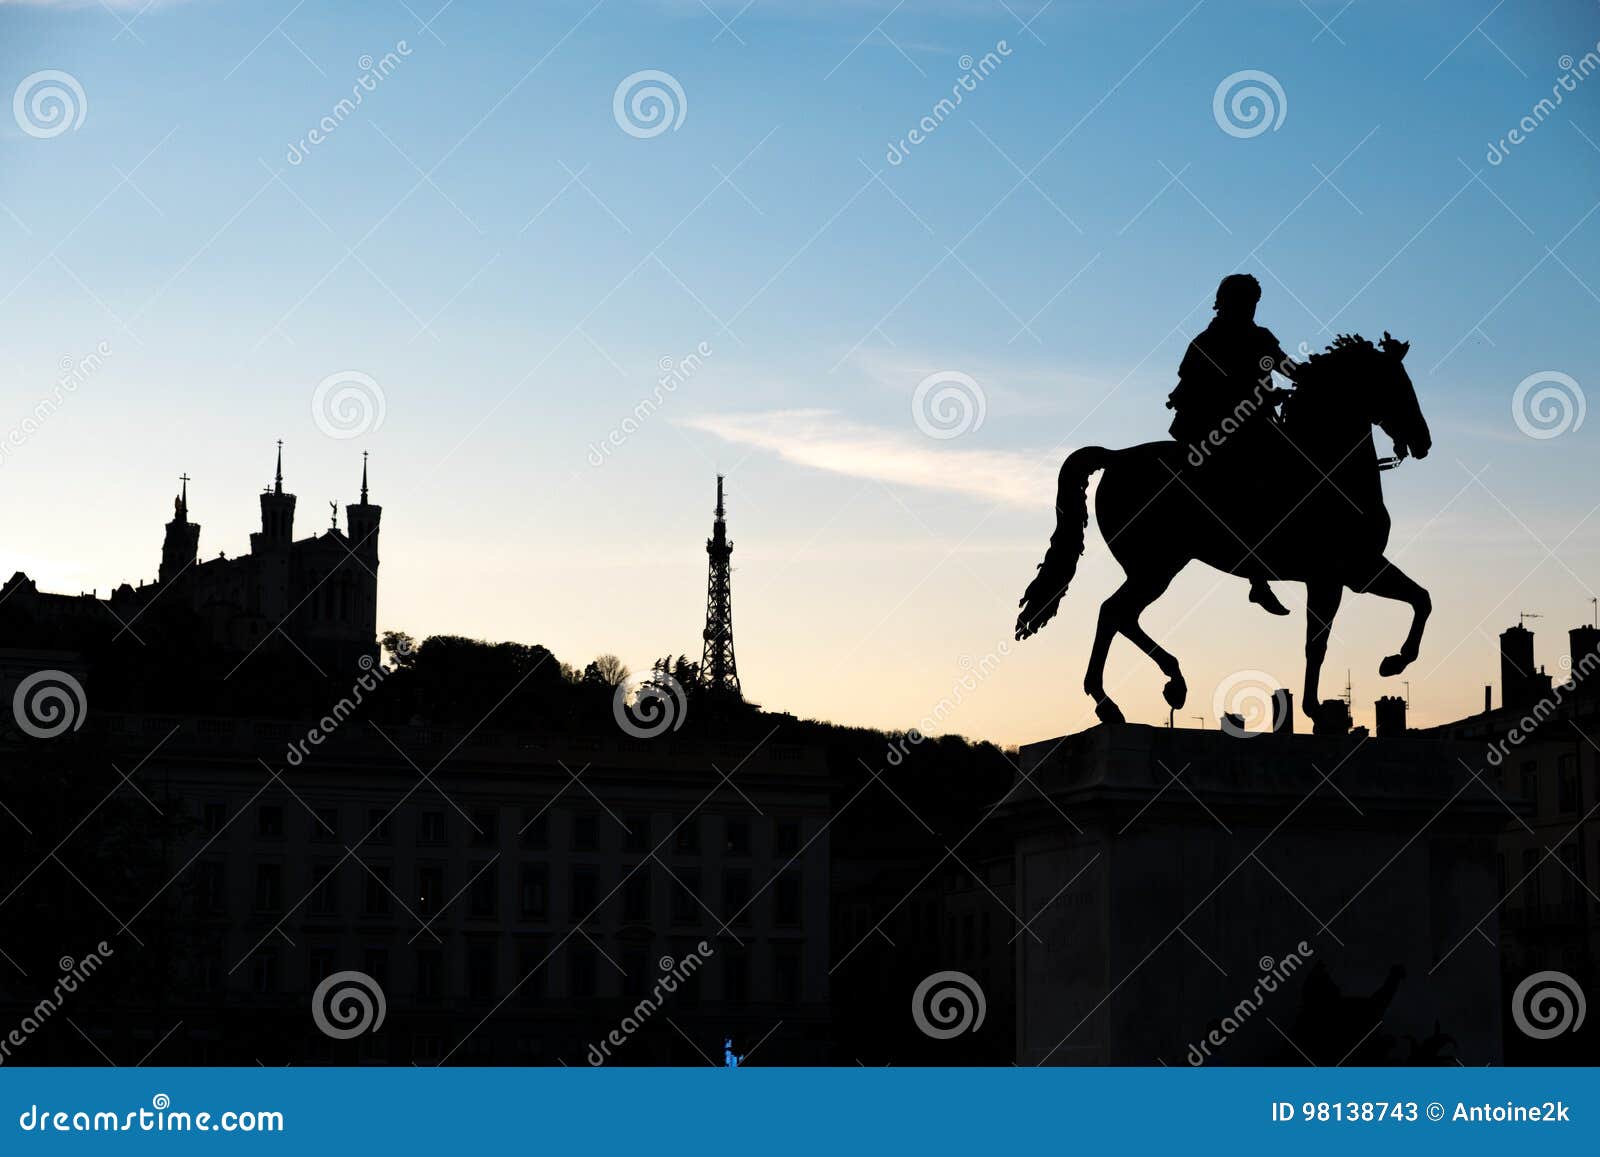 louis xiv horse leaving on fourviere cathedral in lyon, france, artistic 